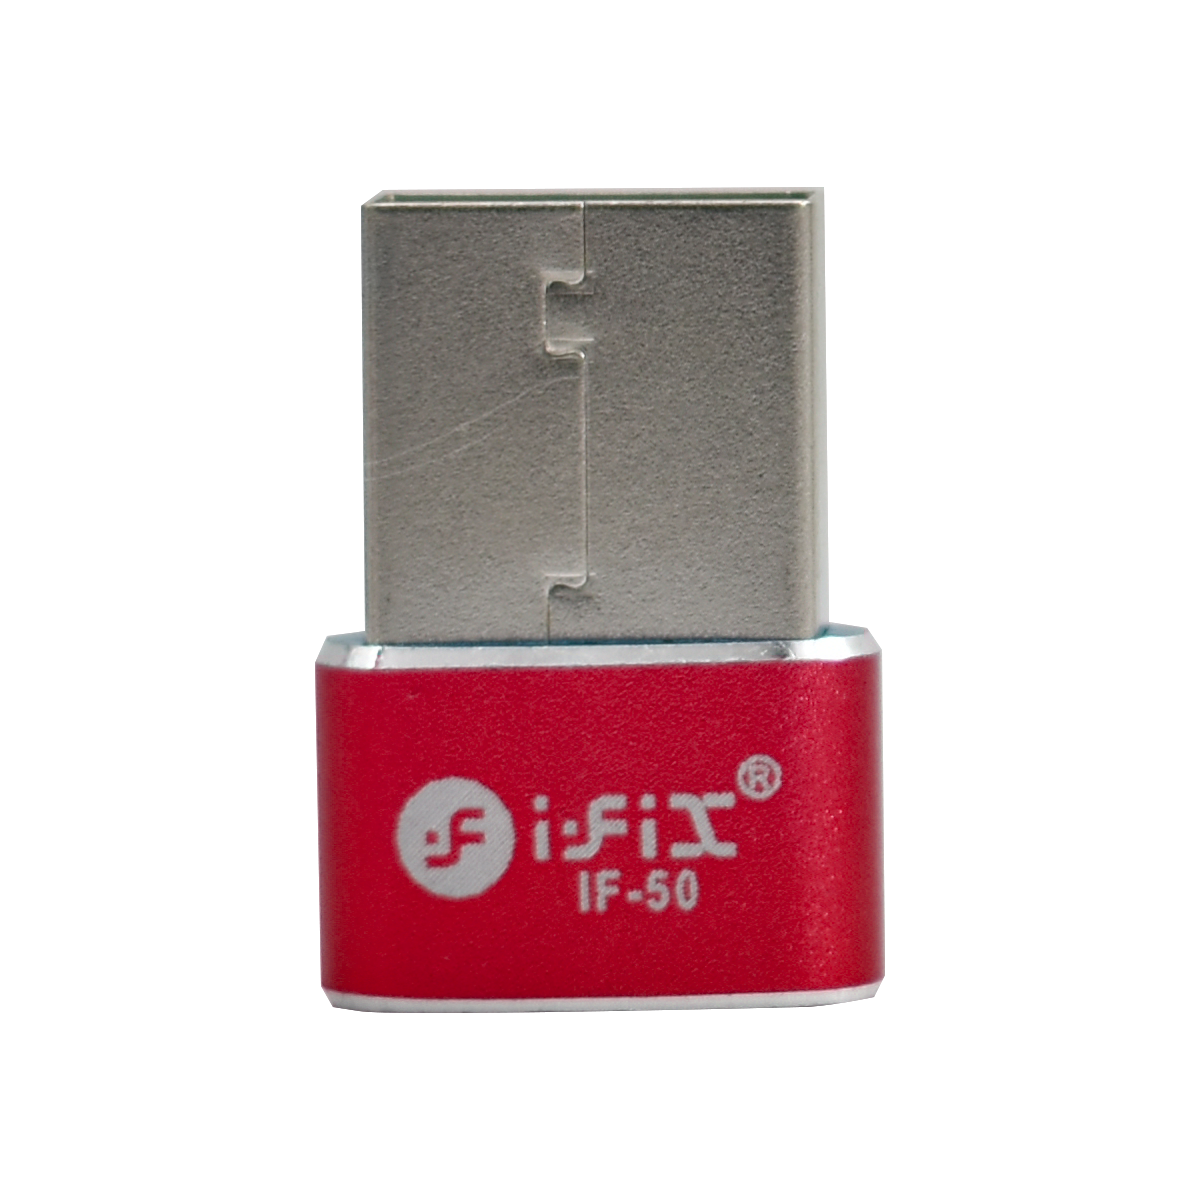 iFiX IF-50 Super fast Plug & Play  PD Connector (Red)